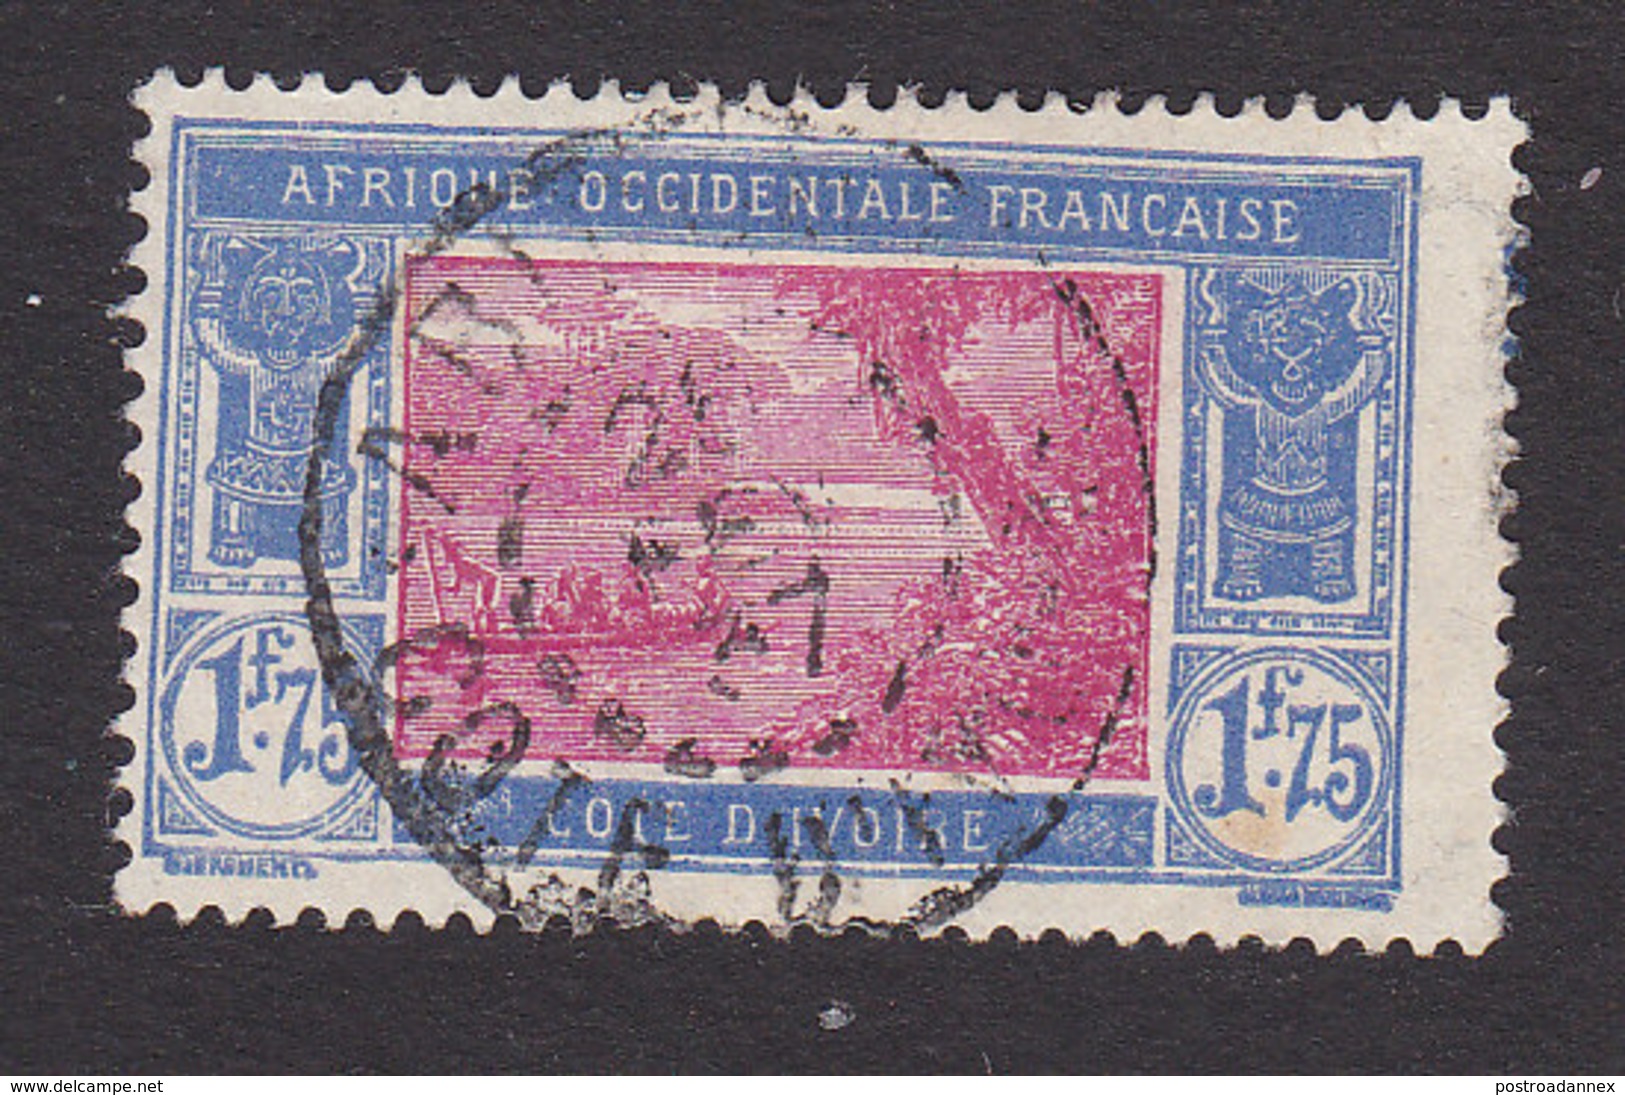 Ivory Coast, Scott #74, Used, River Scene, Issued 1913 - Used Stamps